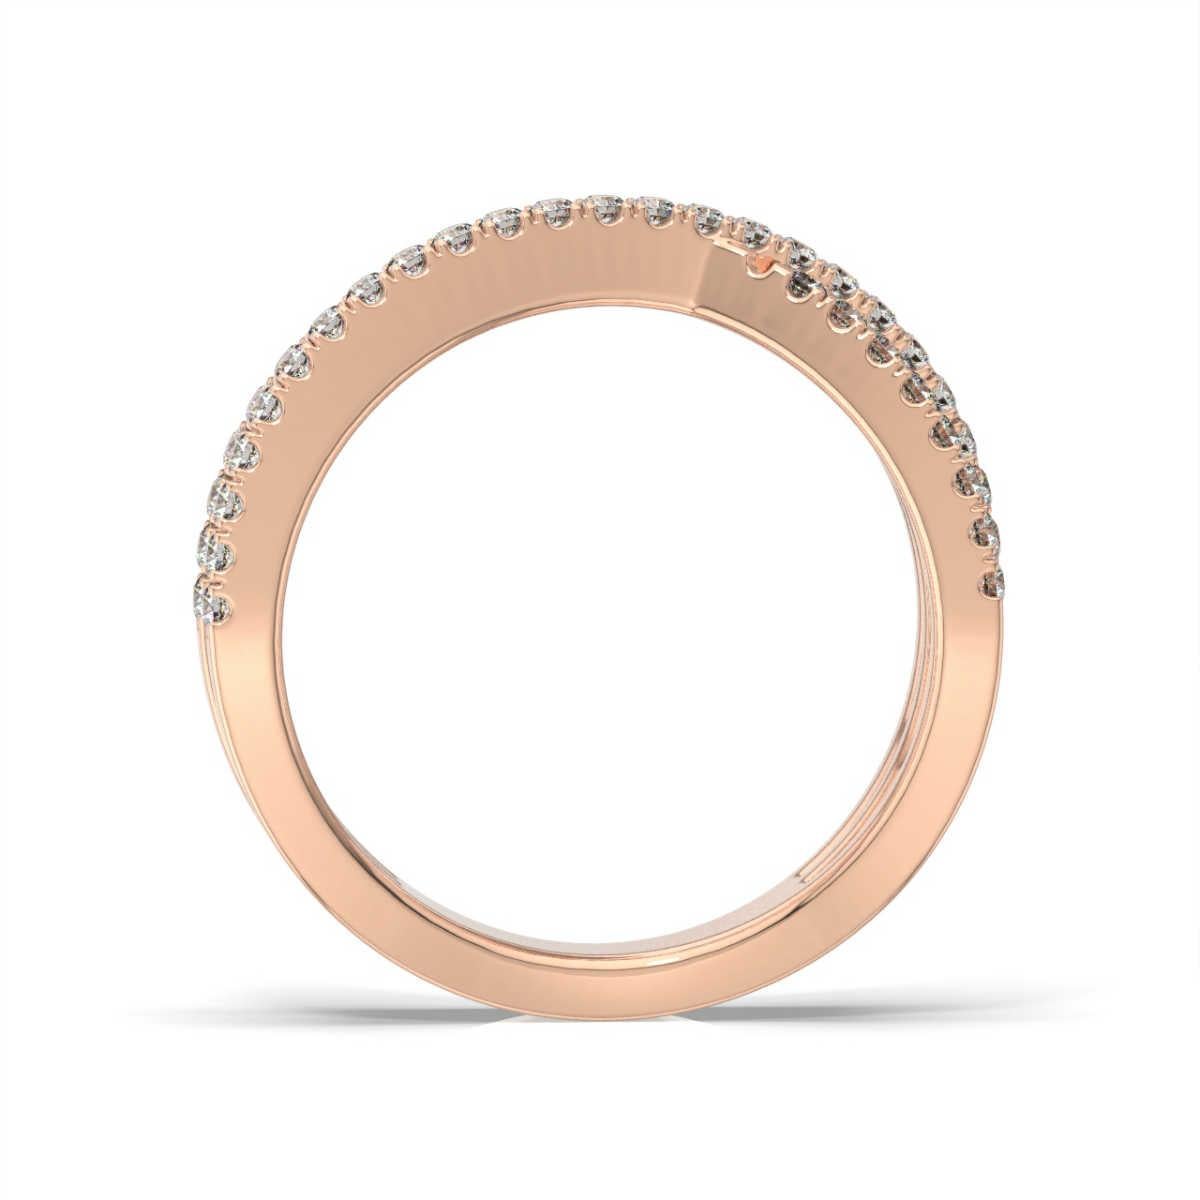 This contemporary, fashionable ring features three rows of Interweave Micro Prongs set diamonds.

Product details: 

Center Gemstone Color: WHITE
Side Gemstone Type: NATURAL DIAMOND
Side Gemstone Shape: ROUND
Metal: 14K Rose Gold
Metal Weight: